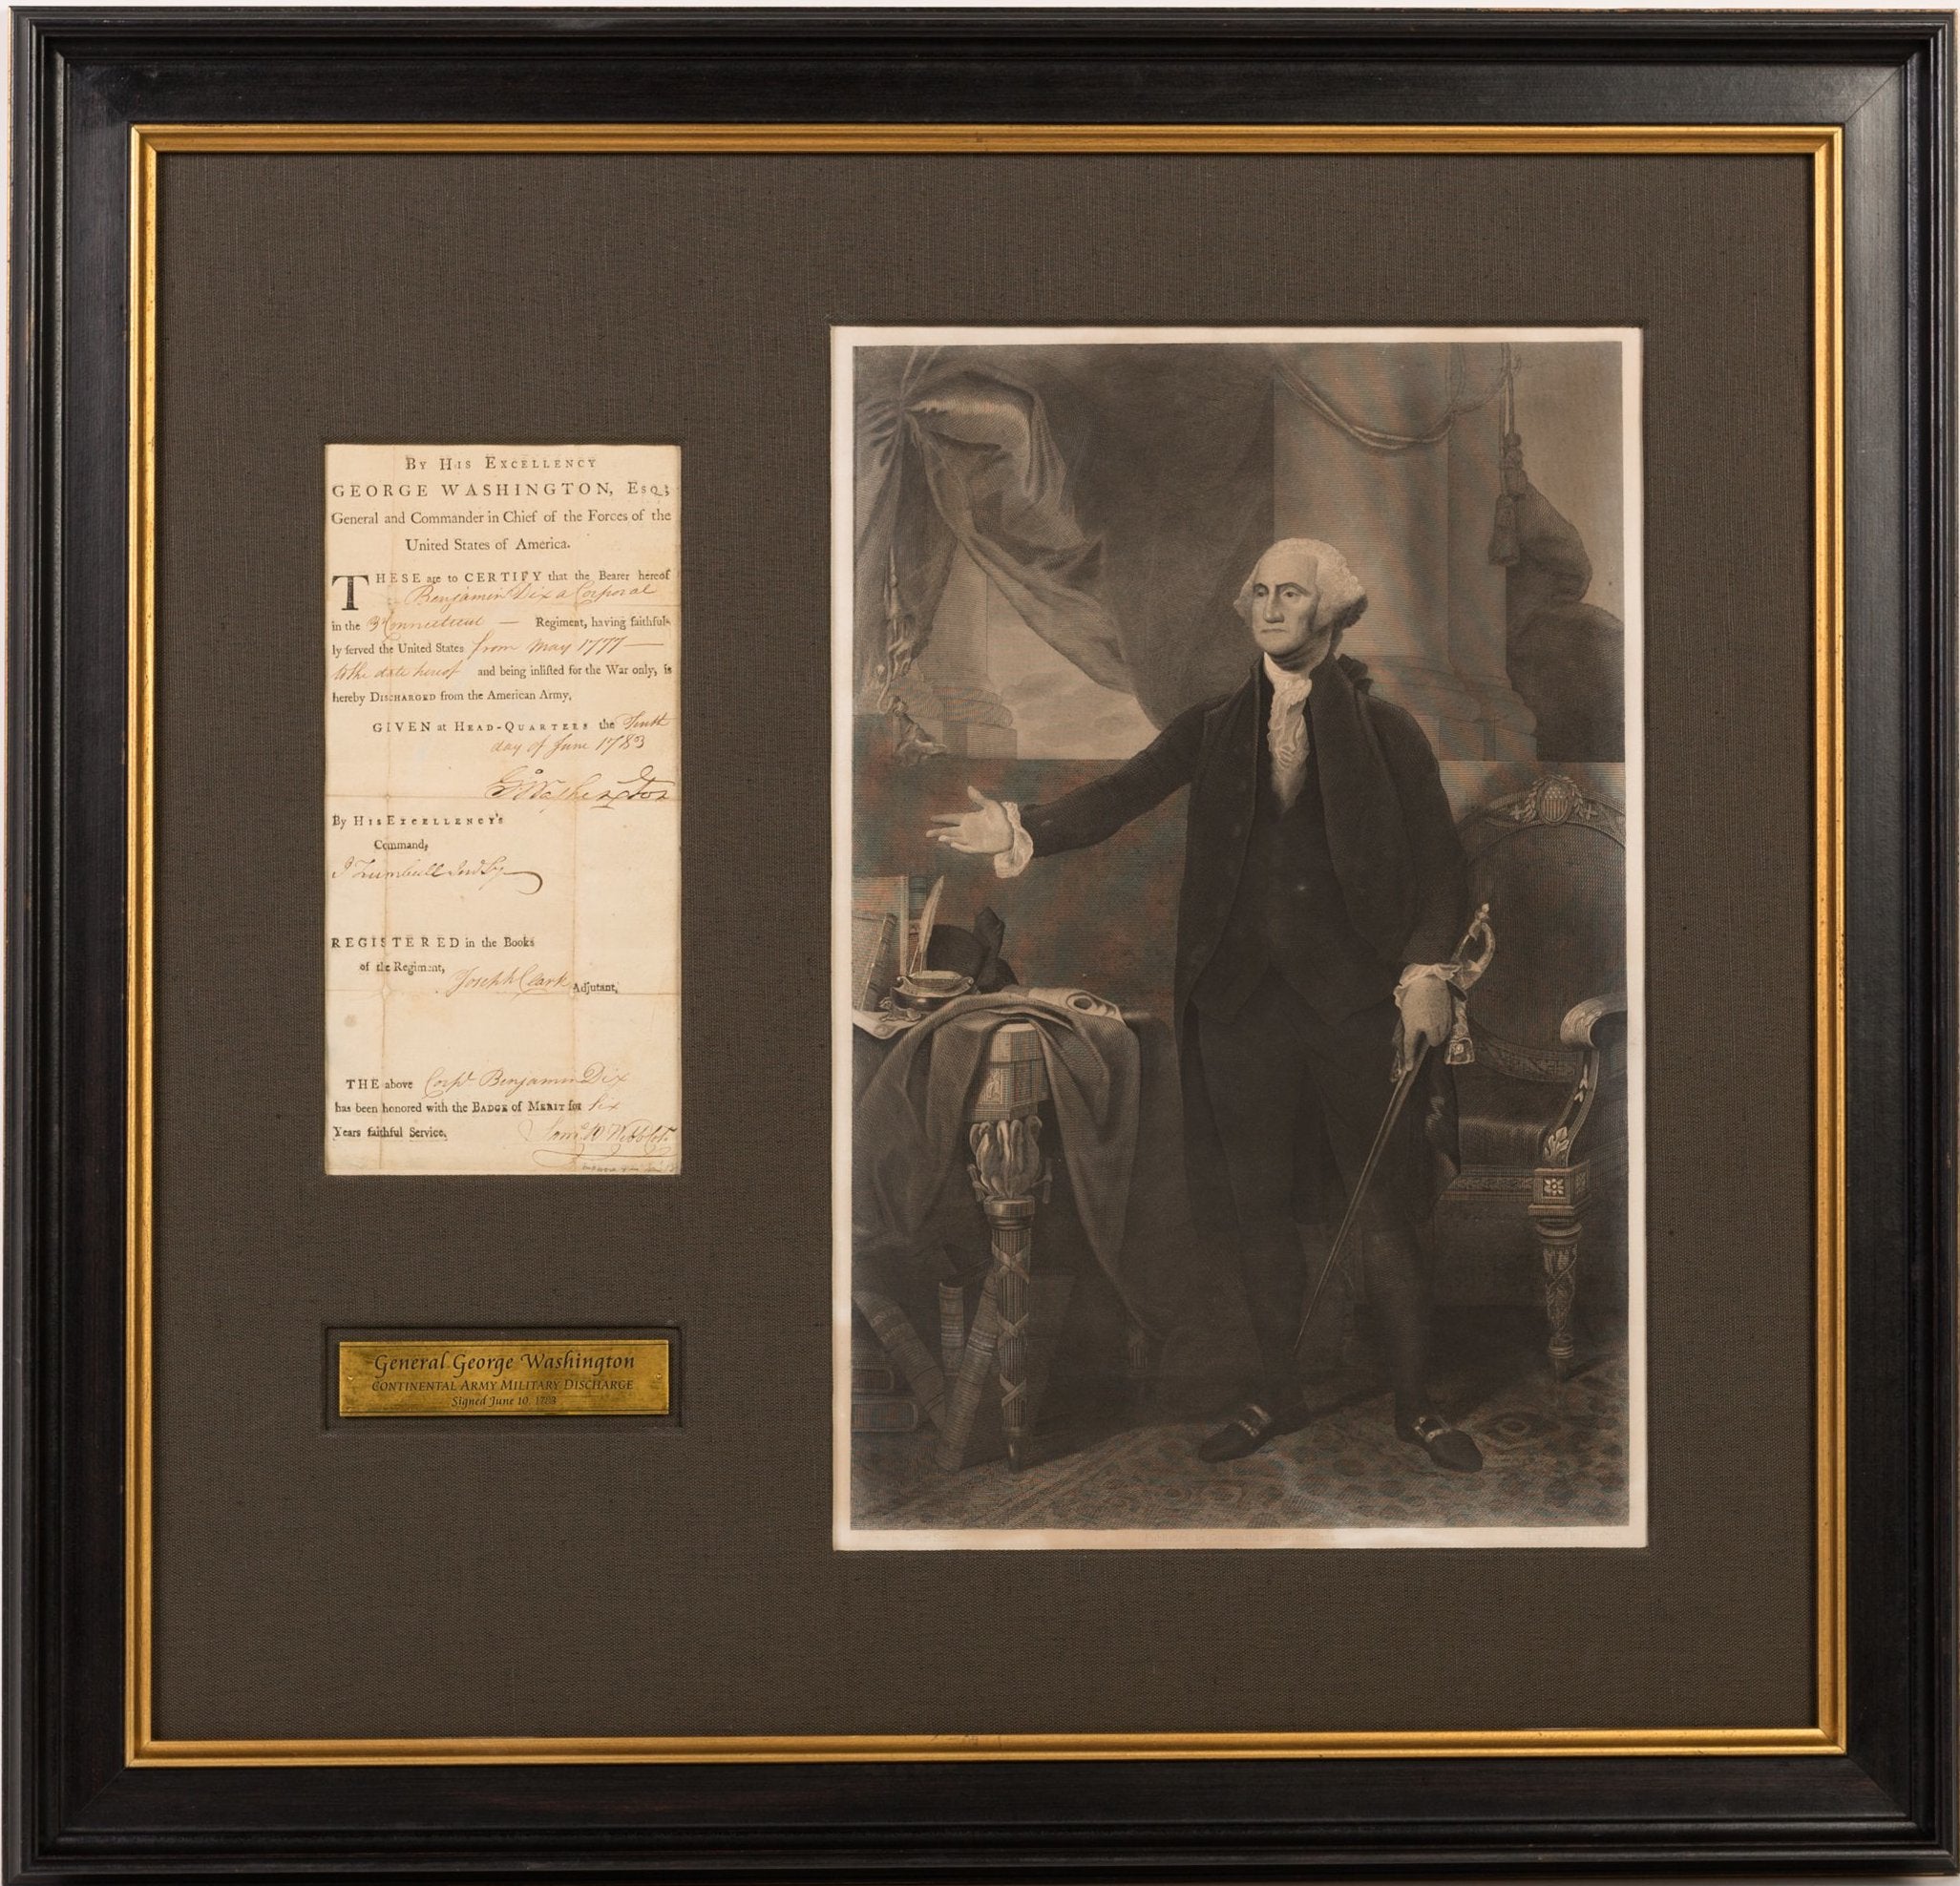 New Arrival! George Washington Signed Discharge Document